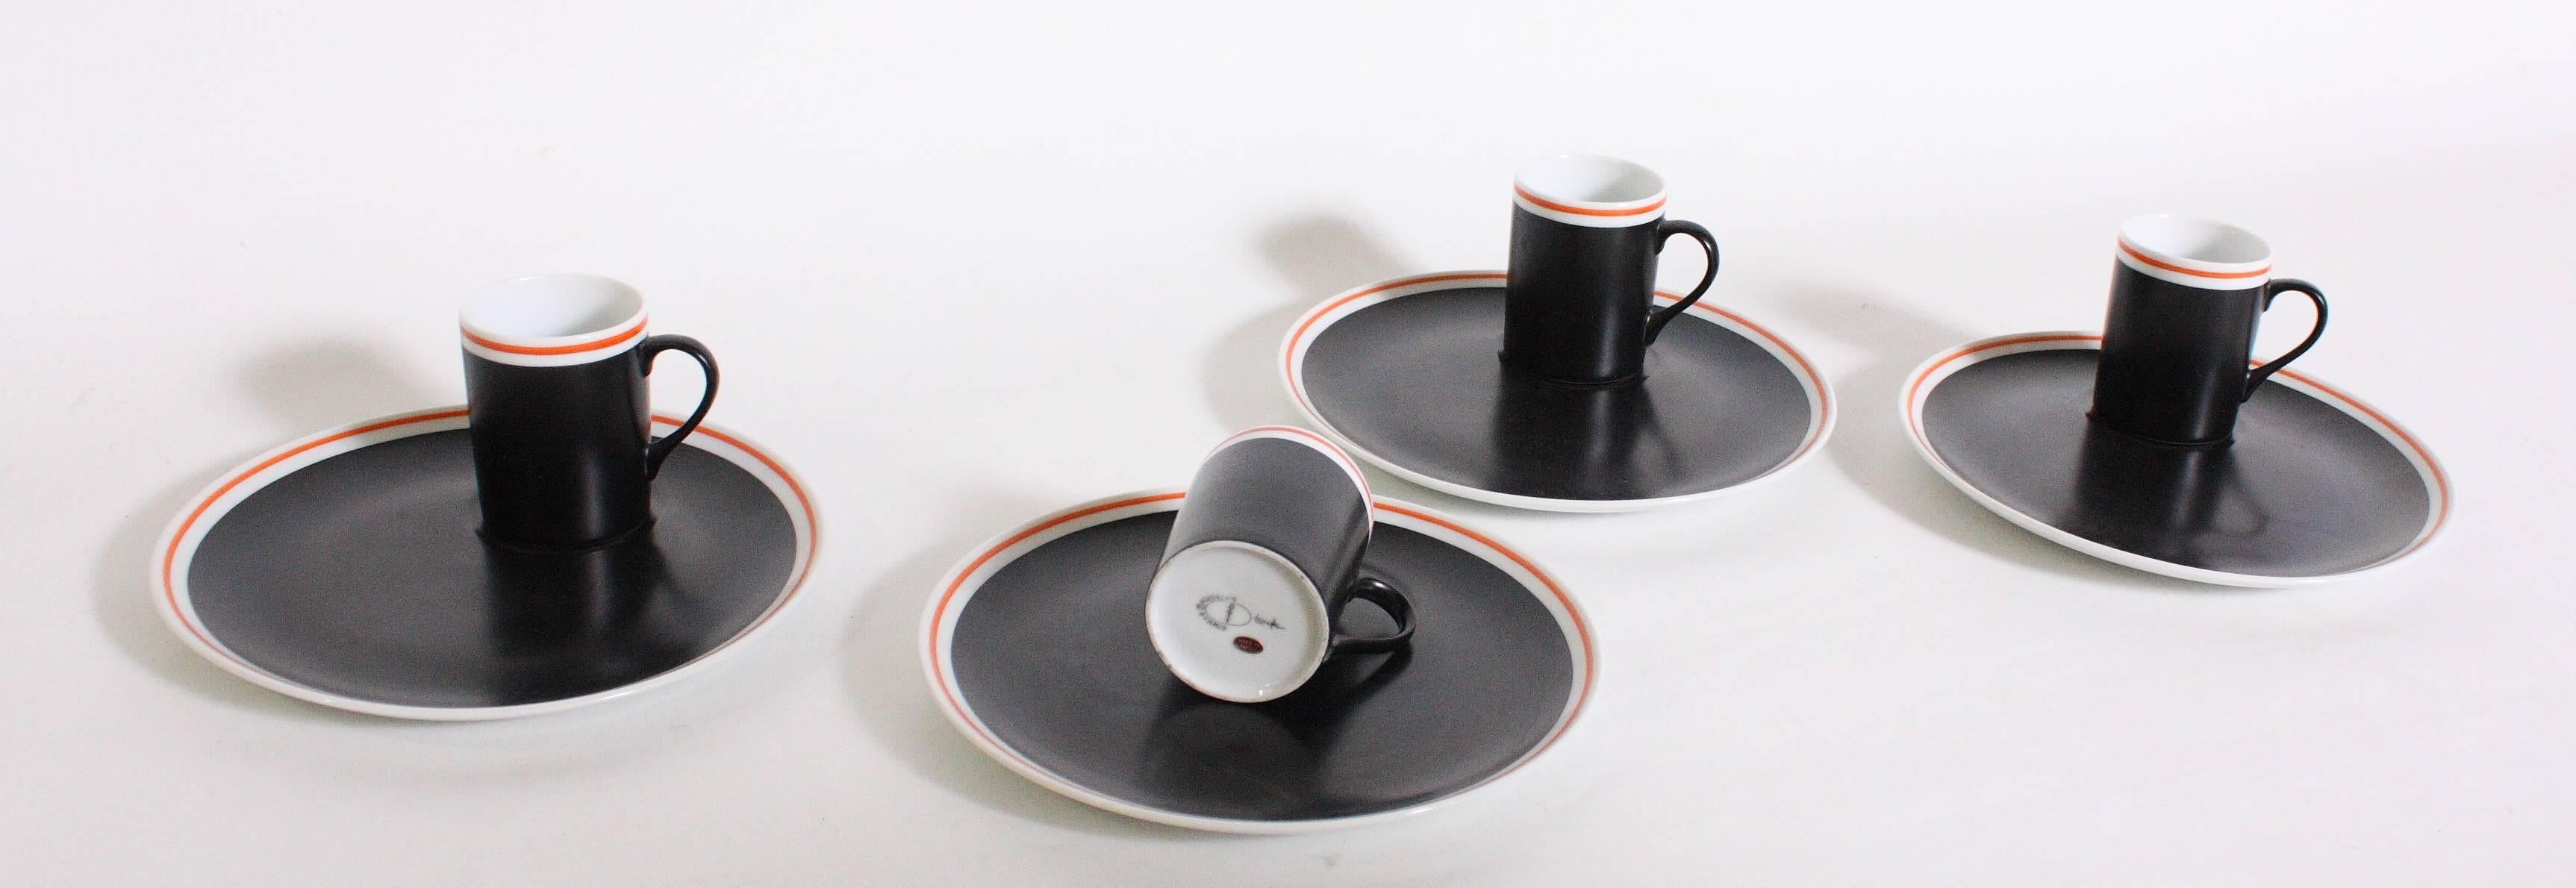 The Lagardo Tackett tea or espresso set of cups and saucers is a stunning blend of artistry and functionality. Crafted with meticulous attention to detail, these sets are a testament to Lagardo Tackett's unique design aesthetic. 

The cups are